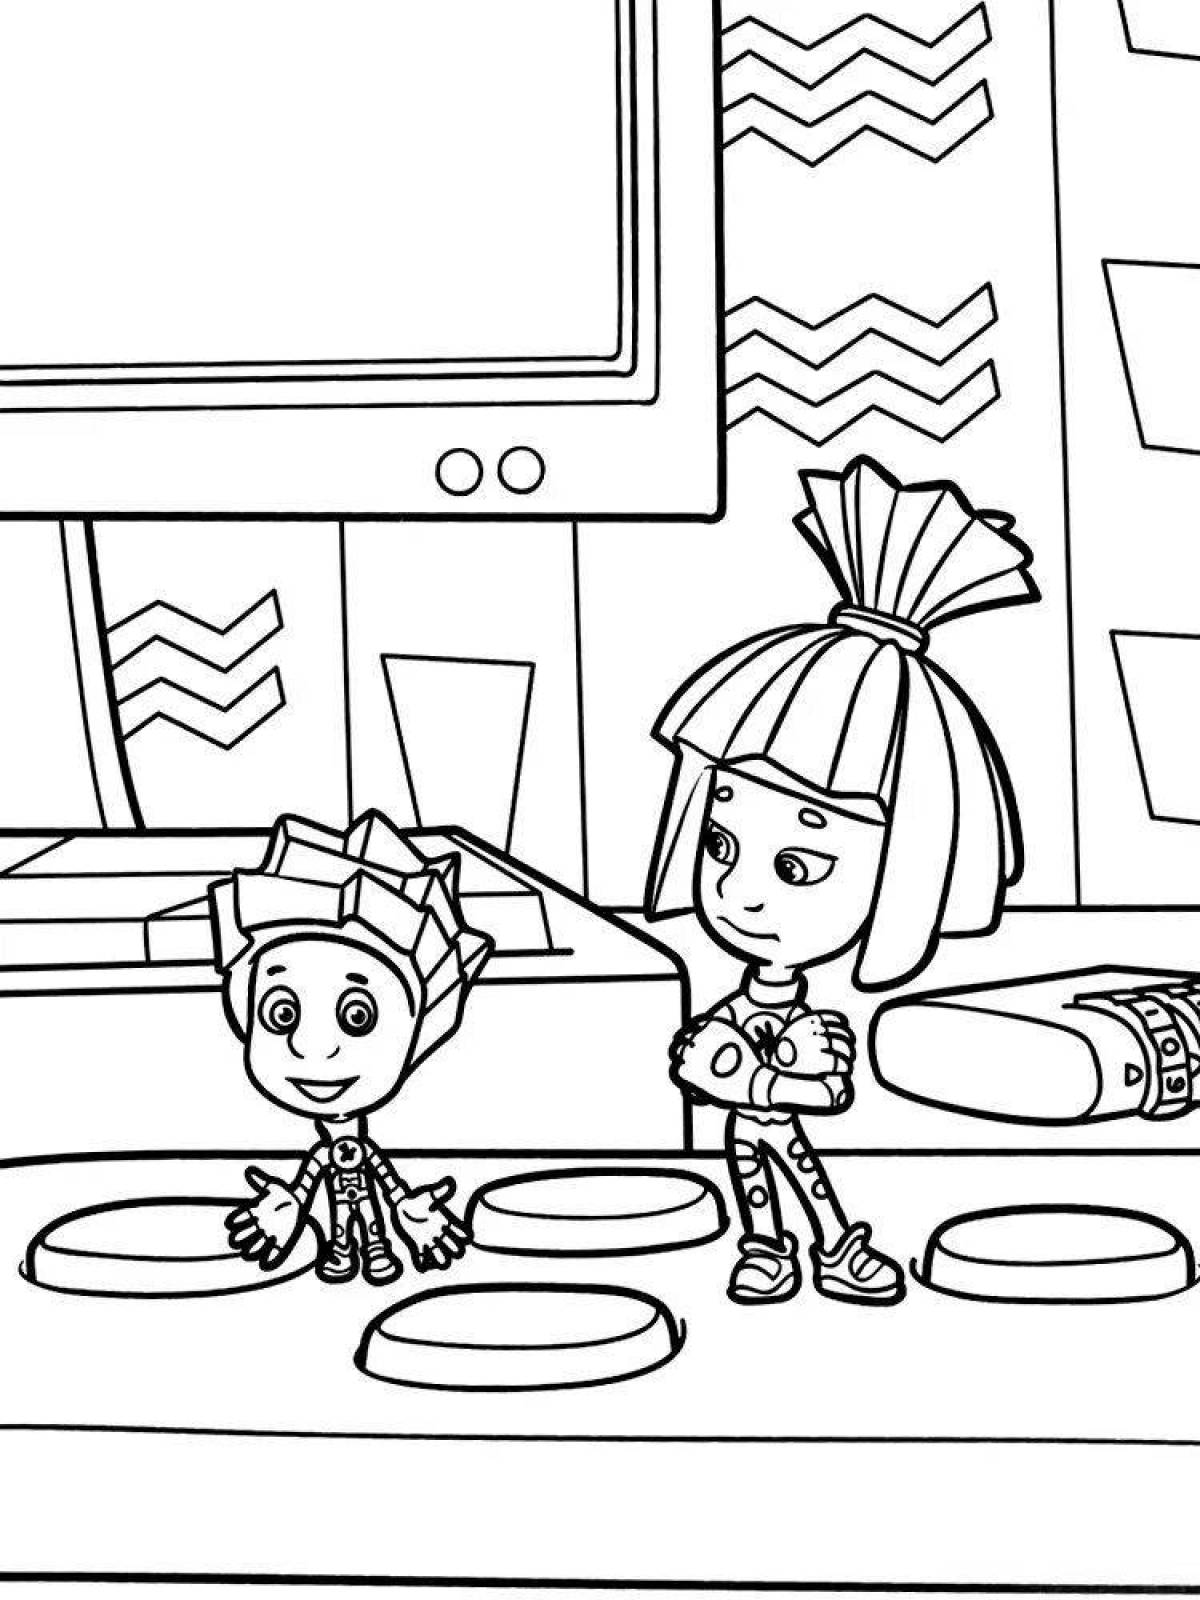 Magic coloring page game fixes